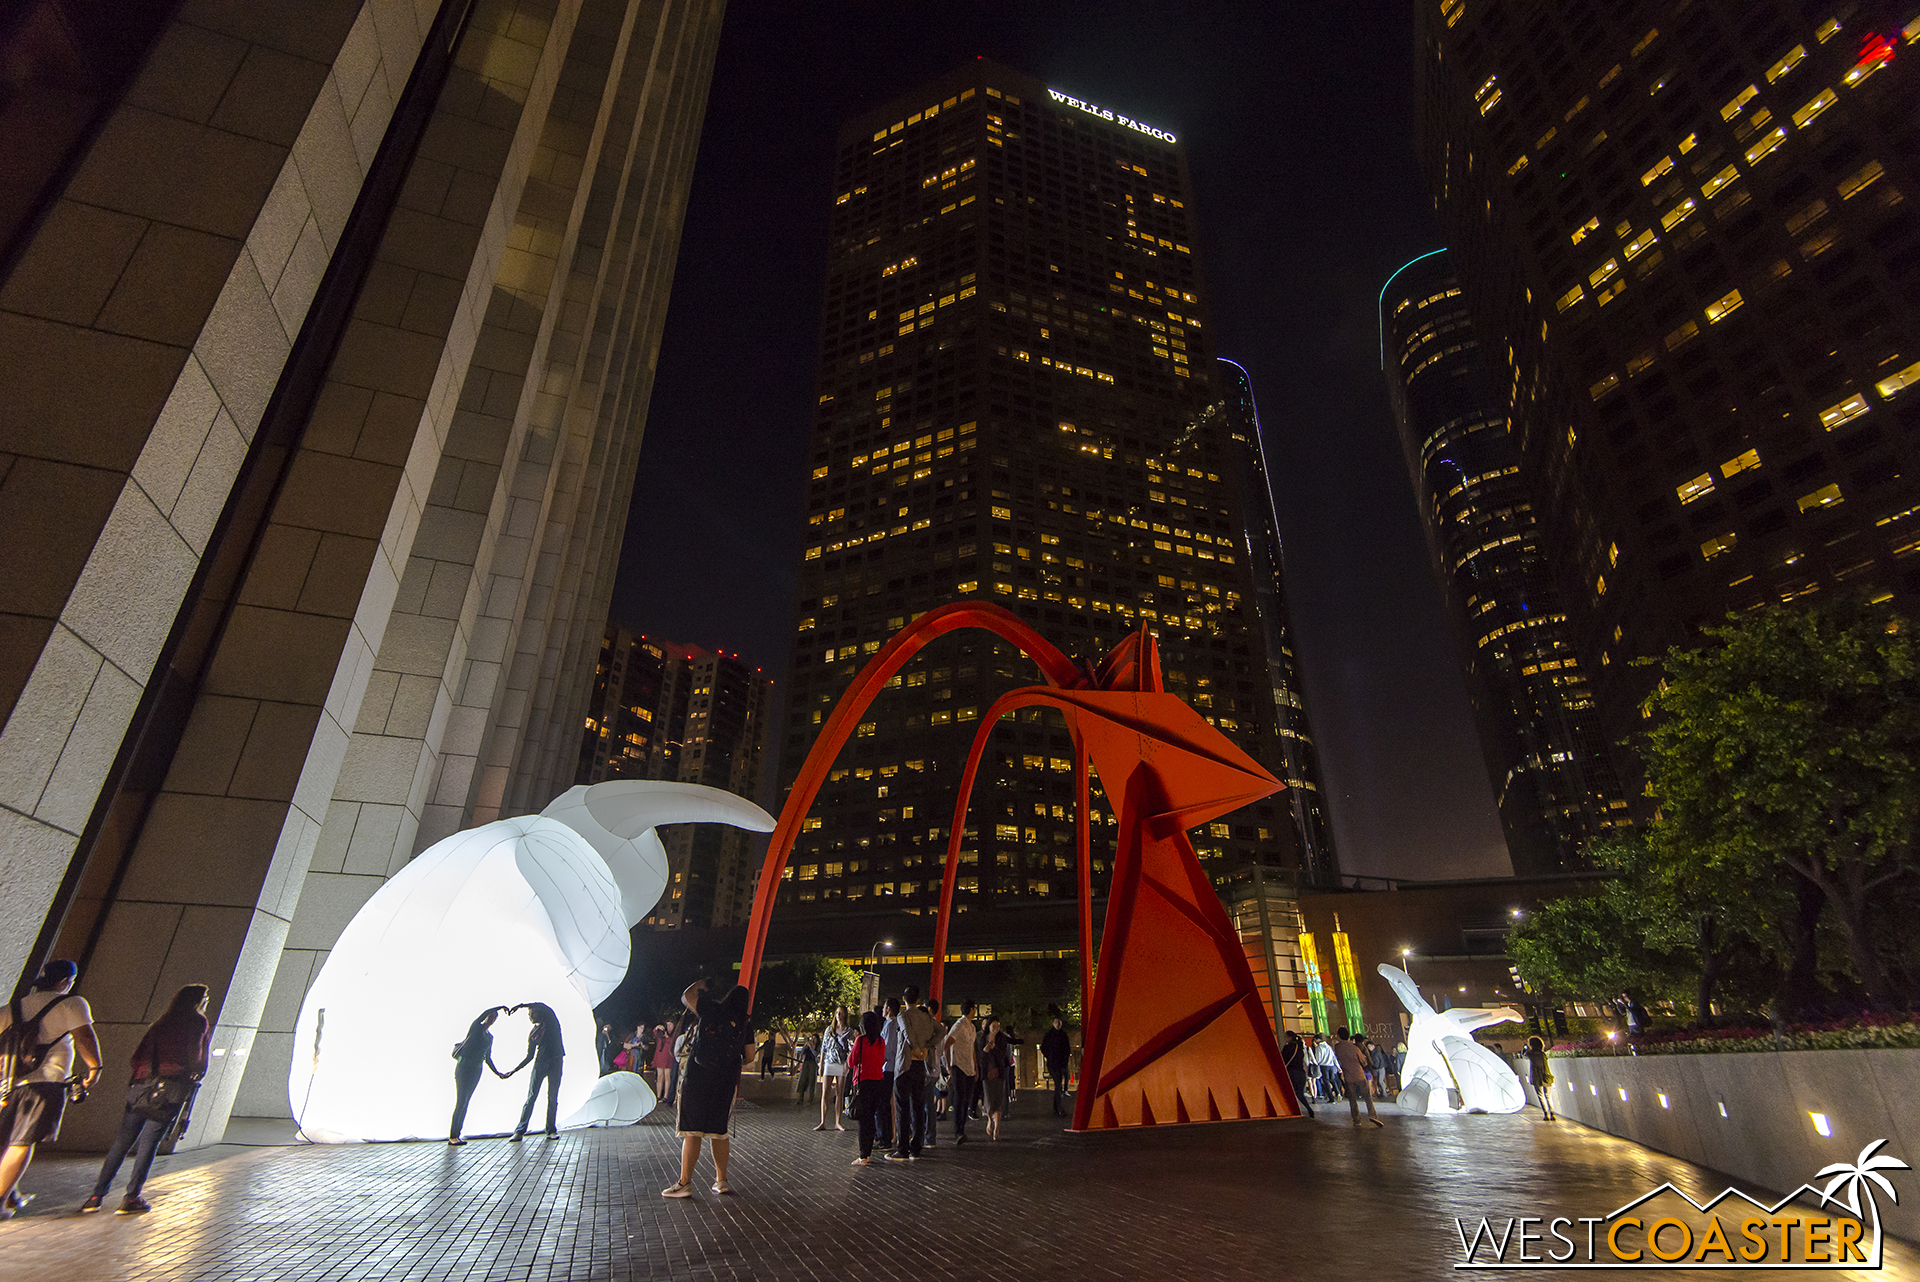  The plaza, with the red "Four Arches" sculpture by Alexander Calder, provided a very nice backdrop. 